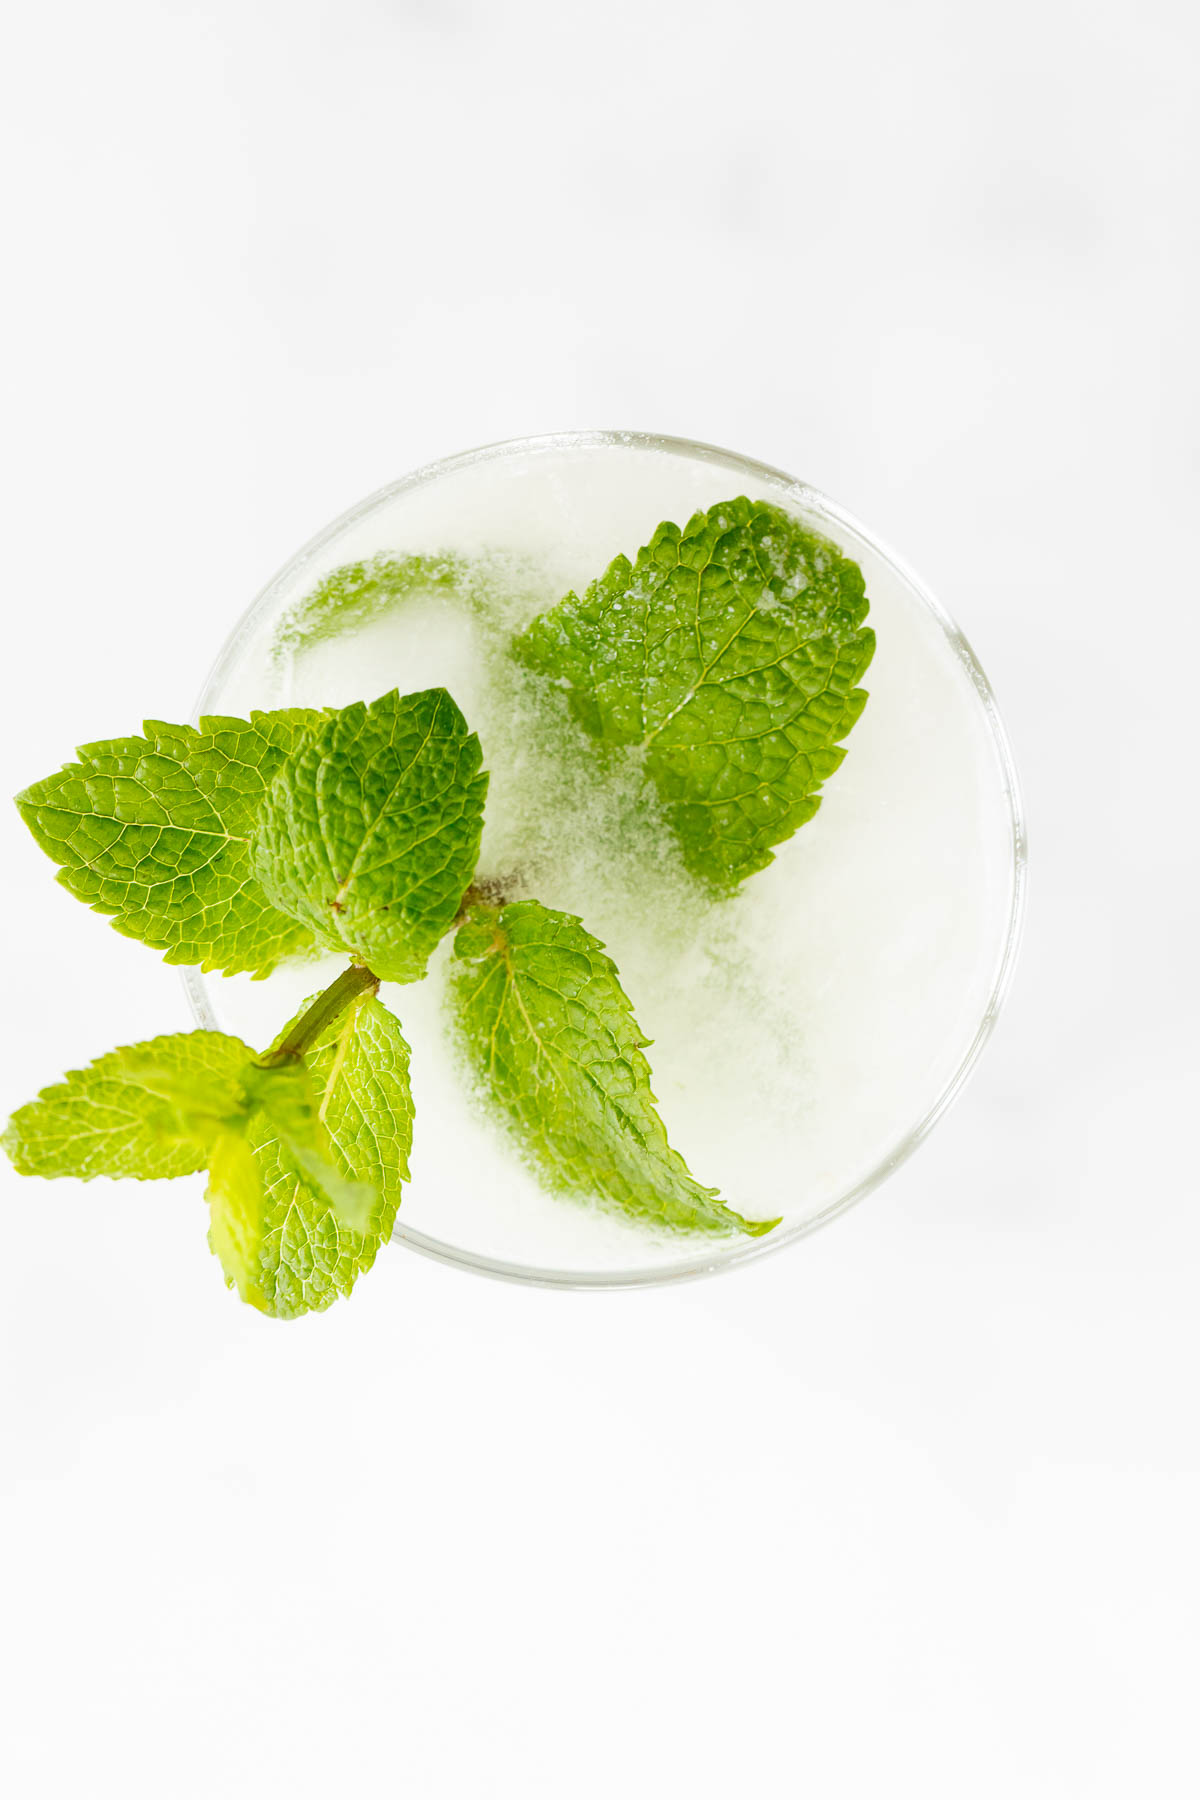 A coconut mojito garnished with mint on a marble surface.